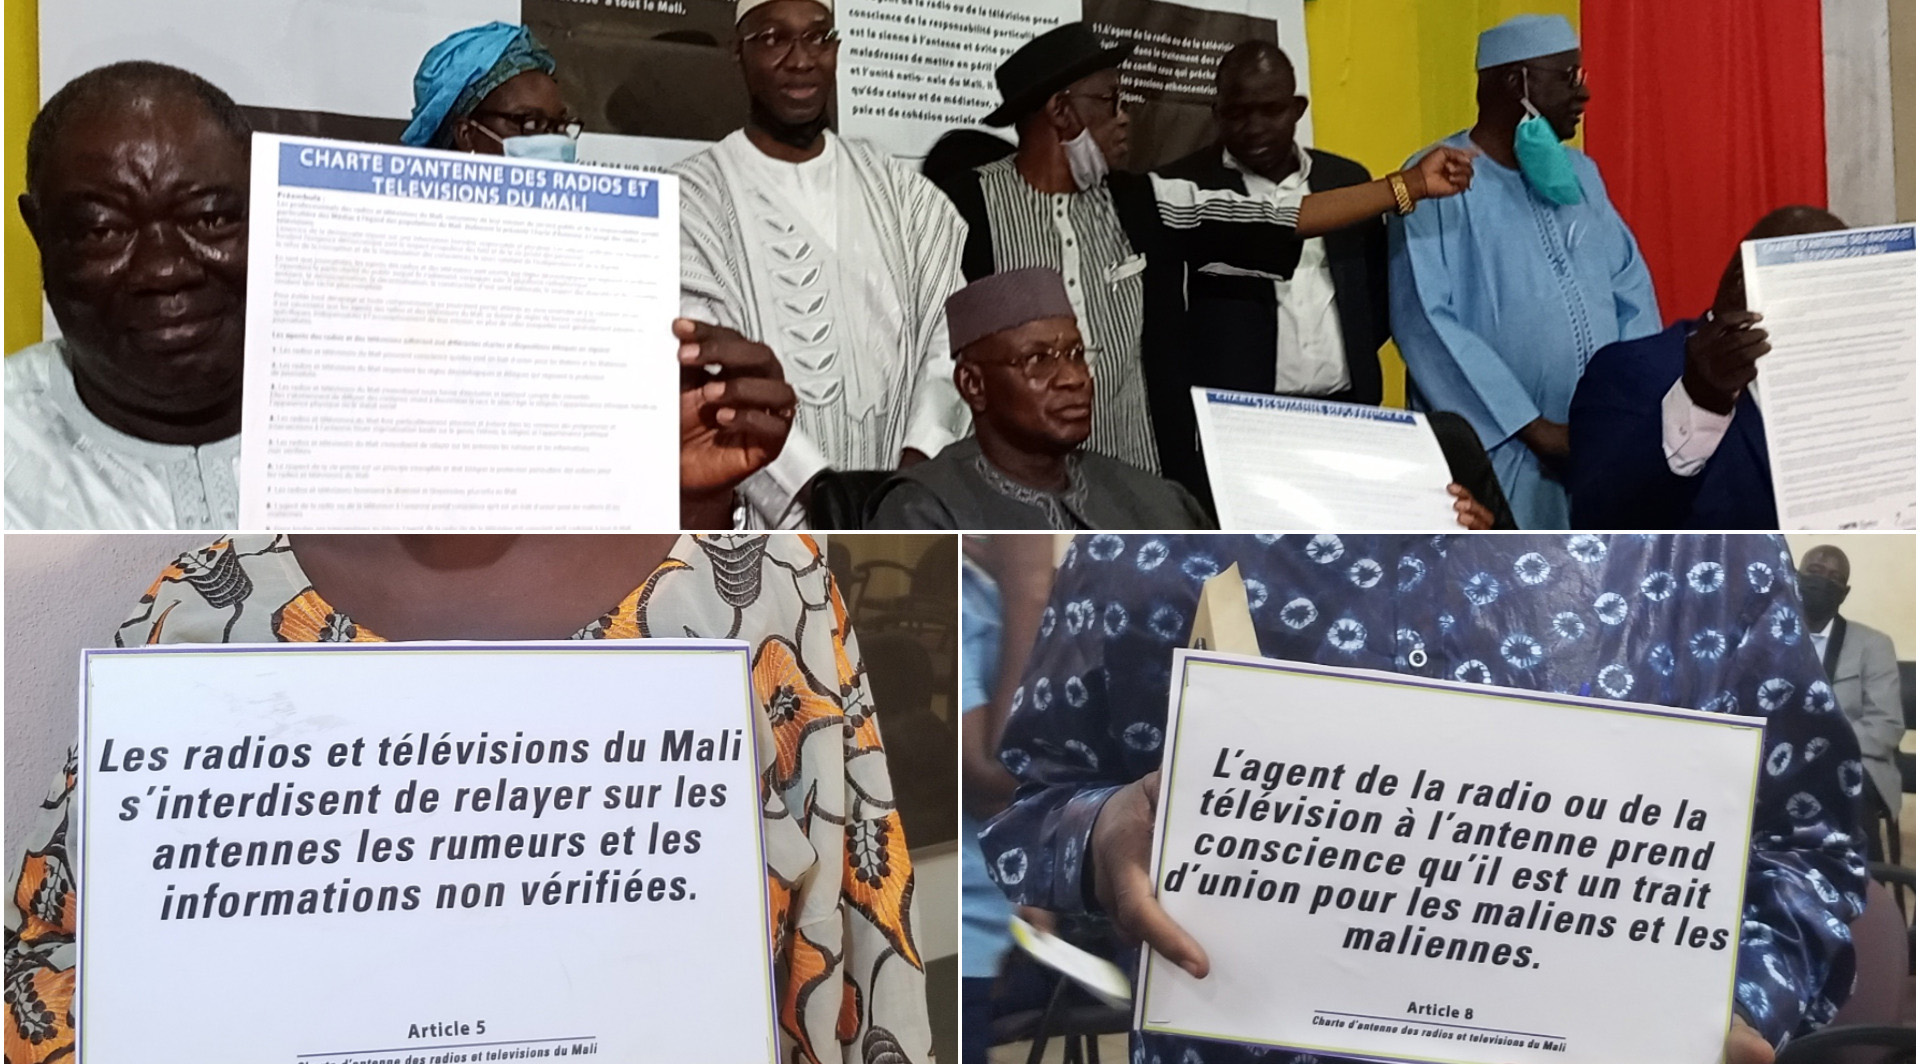 Mali’s radio charter for peace and social cohesion